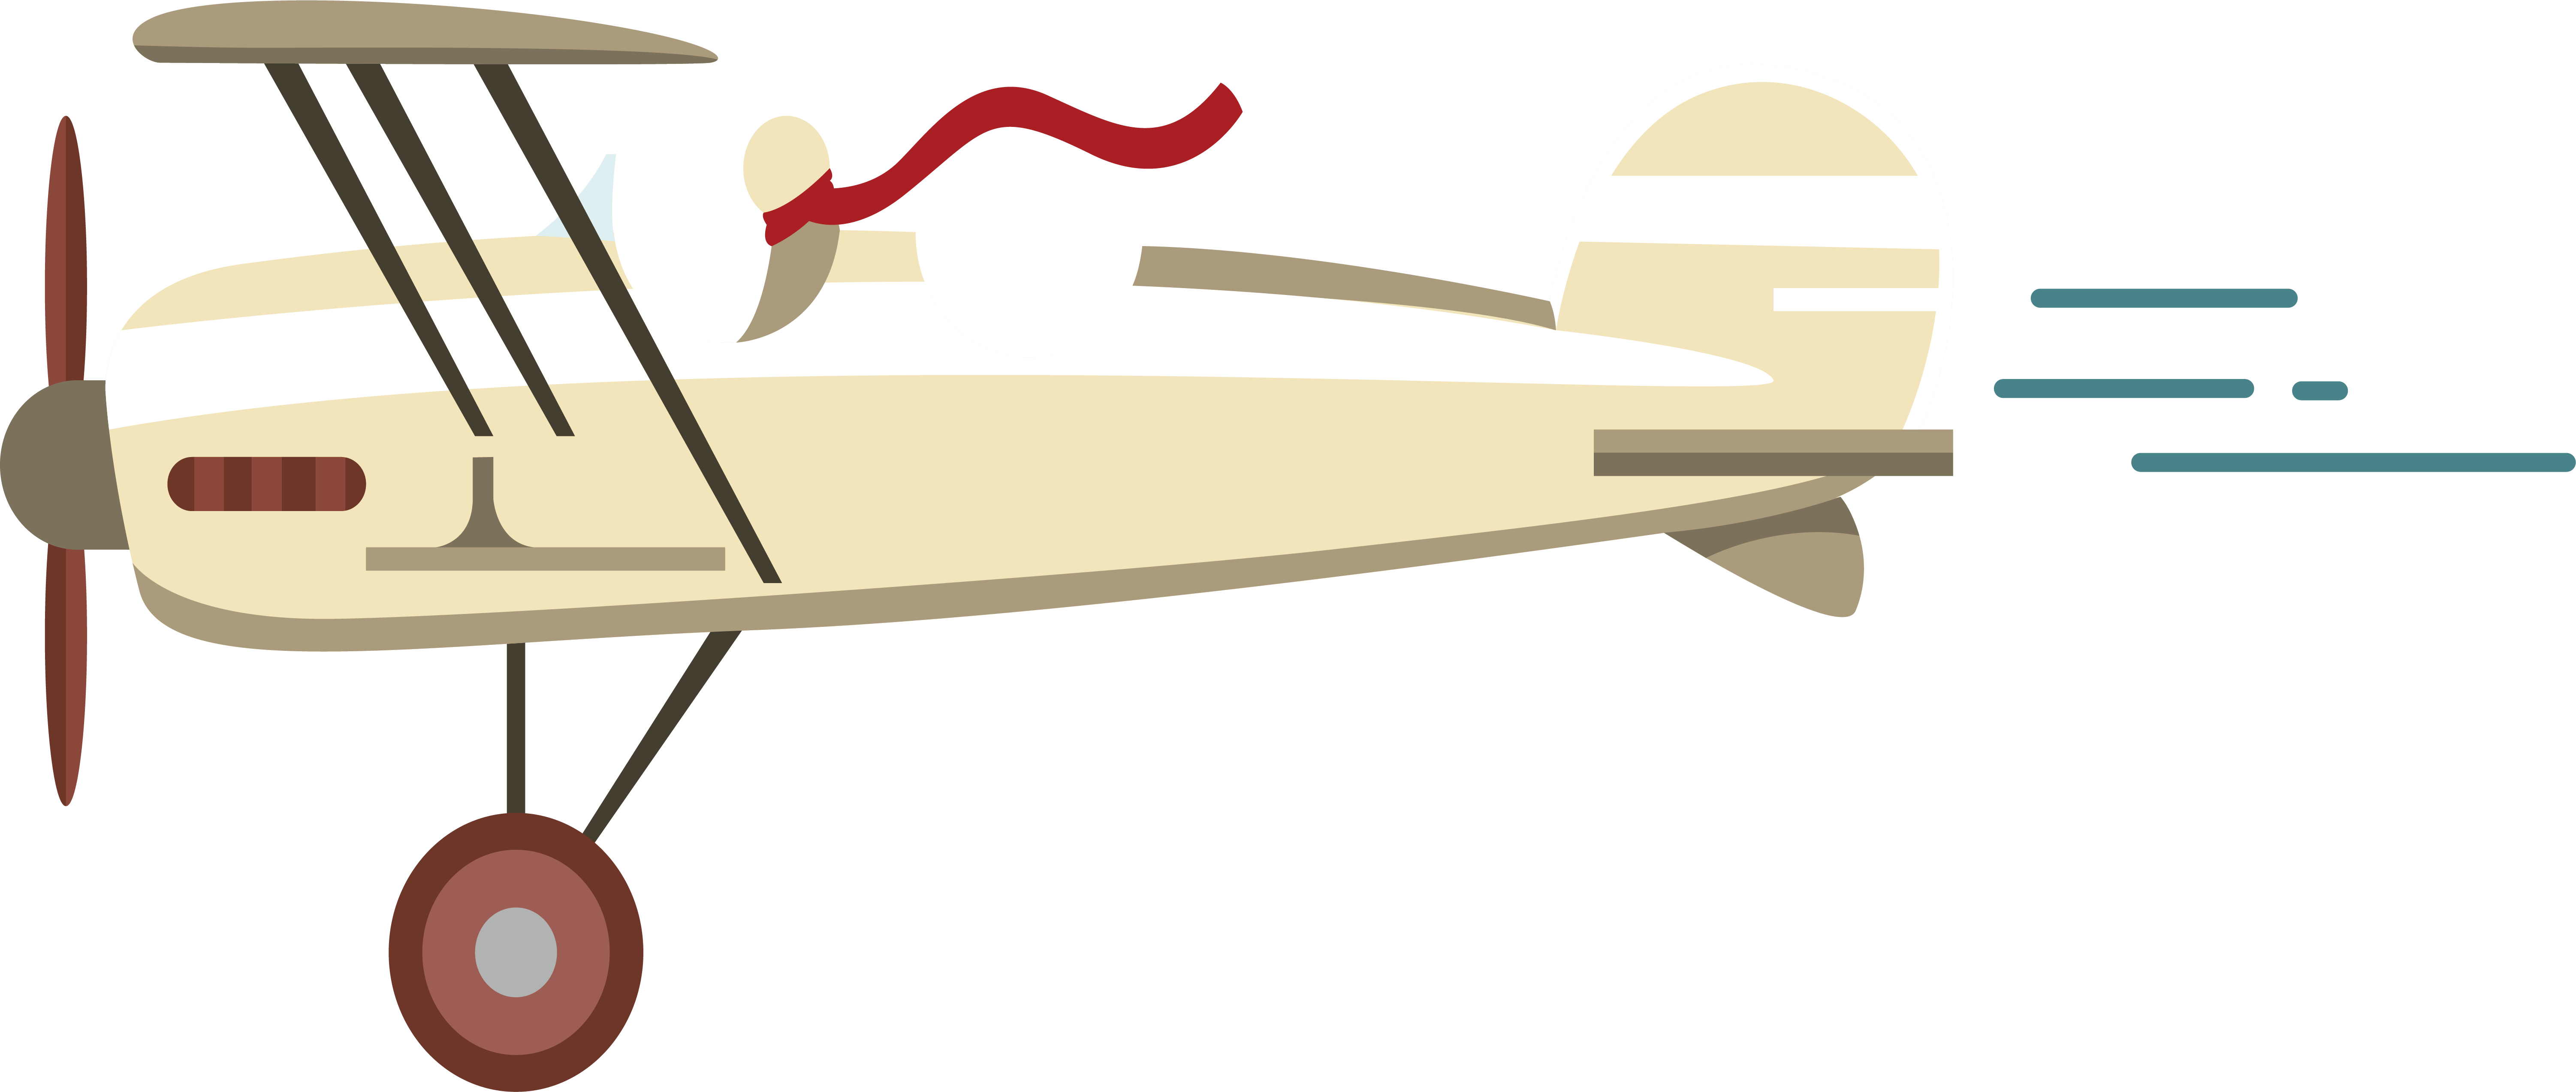 Airplane Aircraft Transprent Vintage Airplane Vector Png